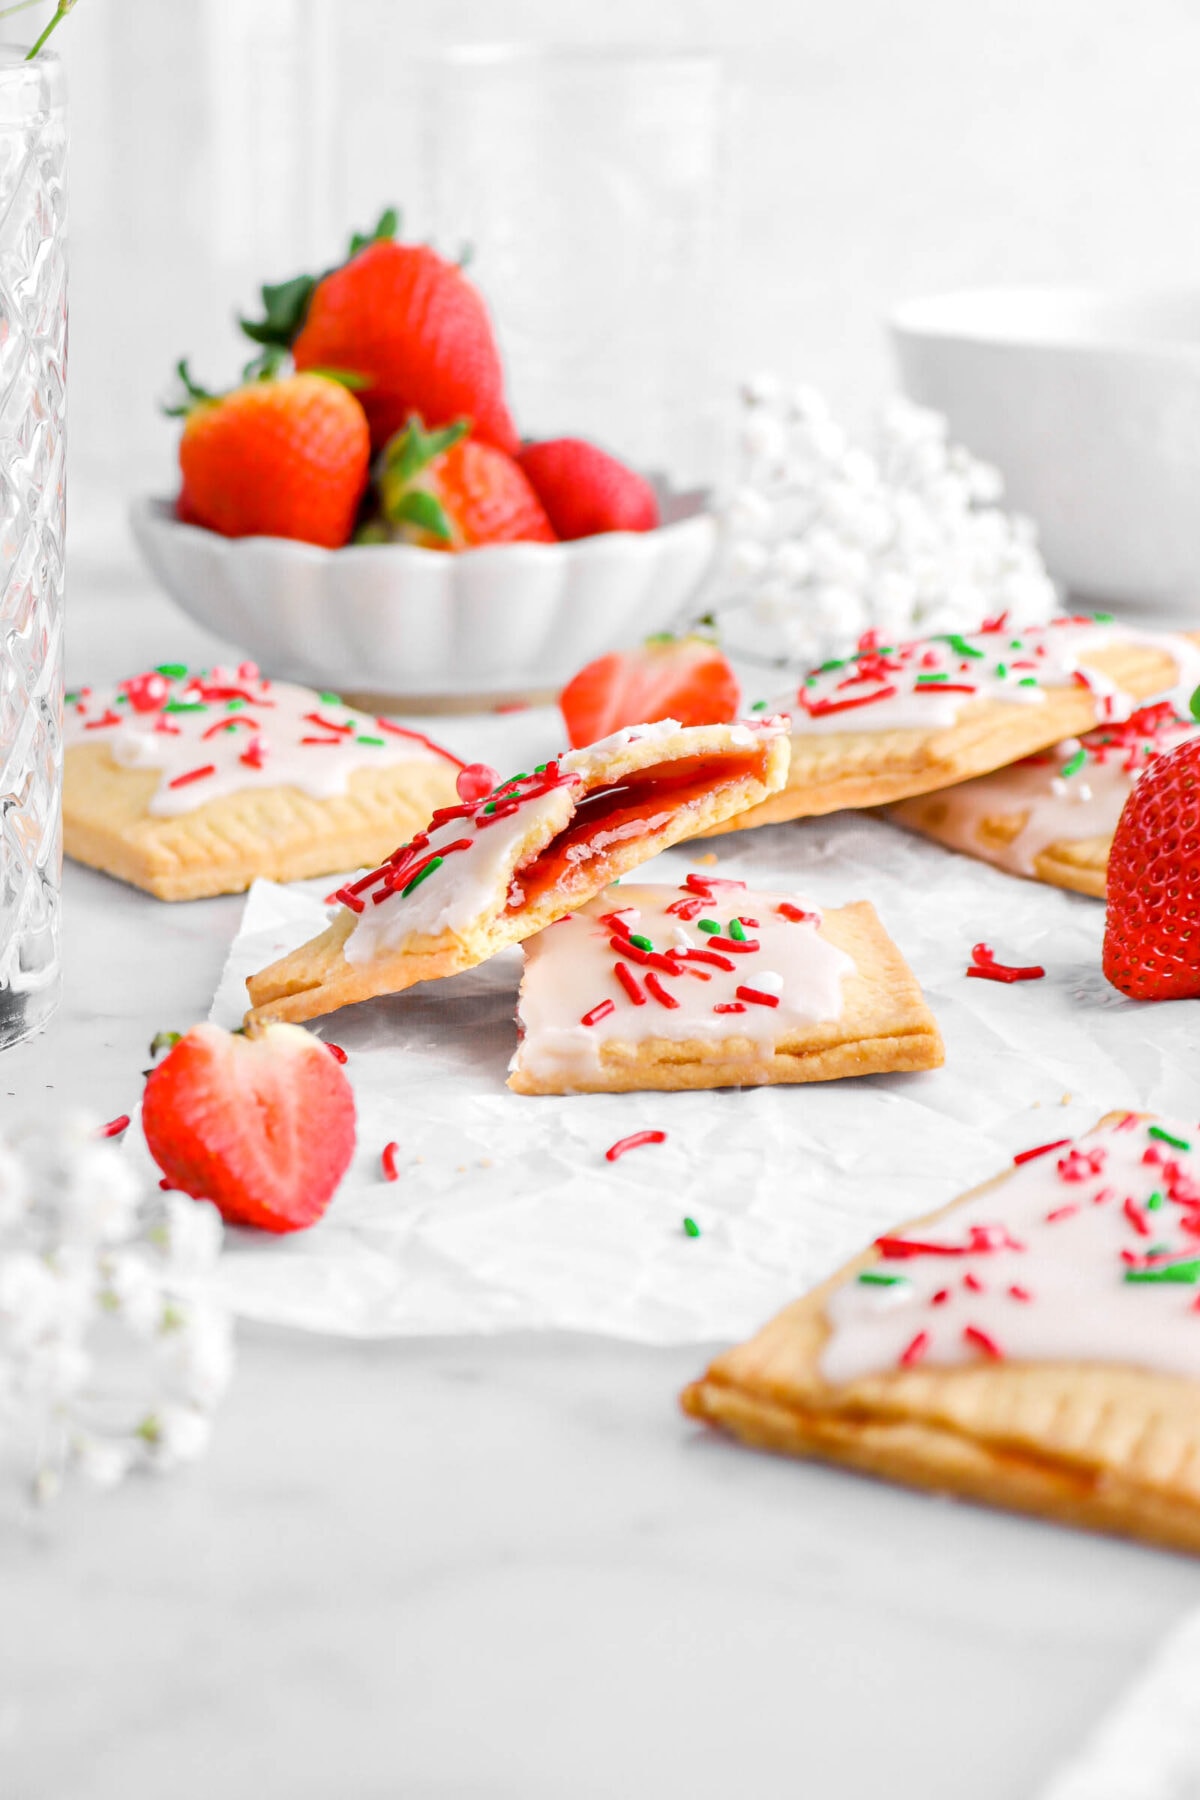 two strawberry pop tart halves on parchment paper with more pop tarts surrounding them, as well as fresh white flowers and strawberries.